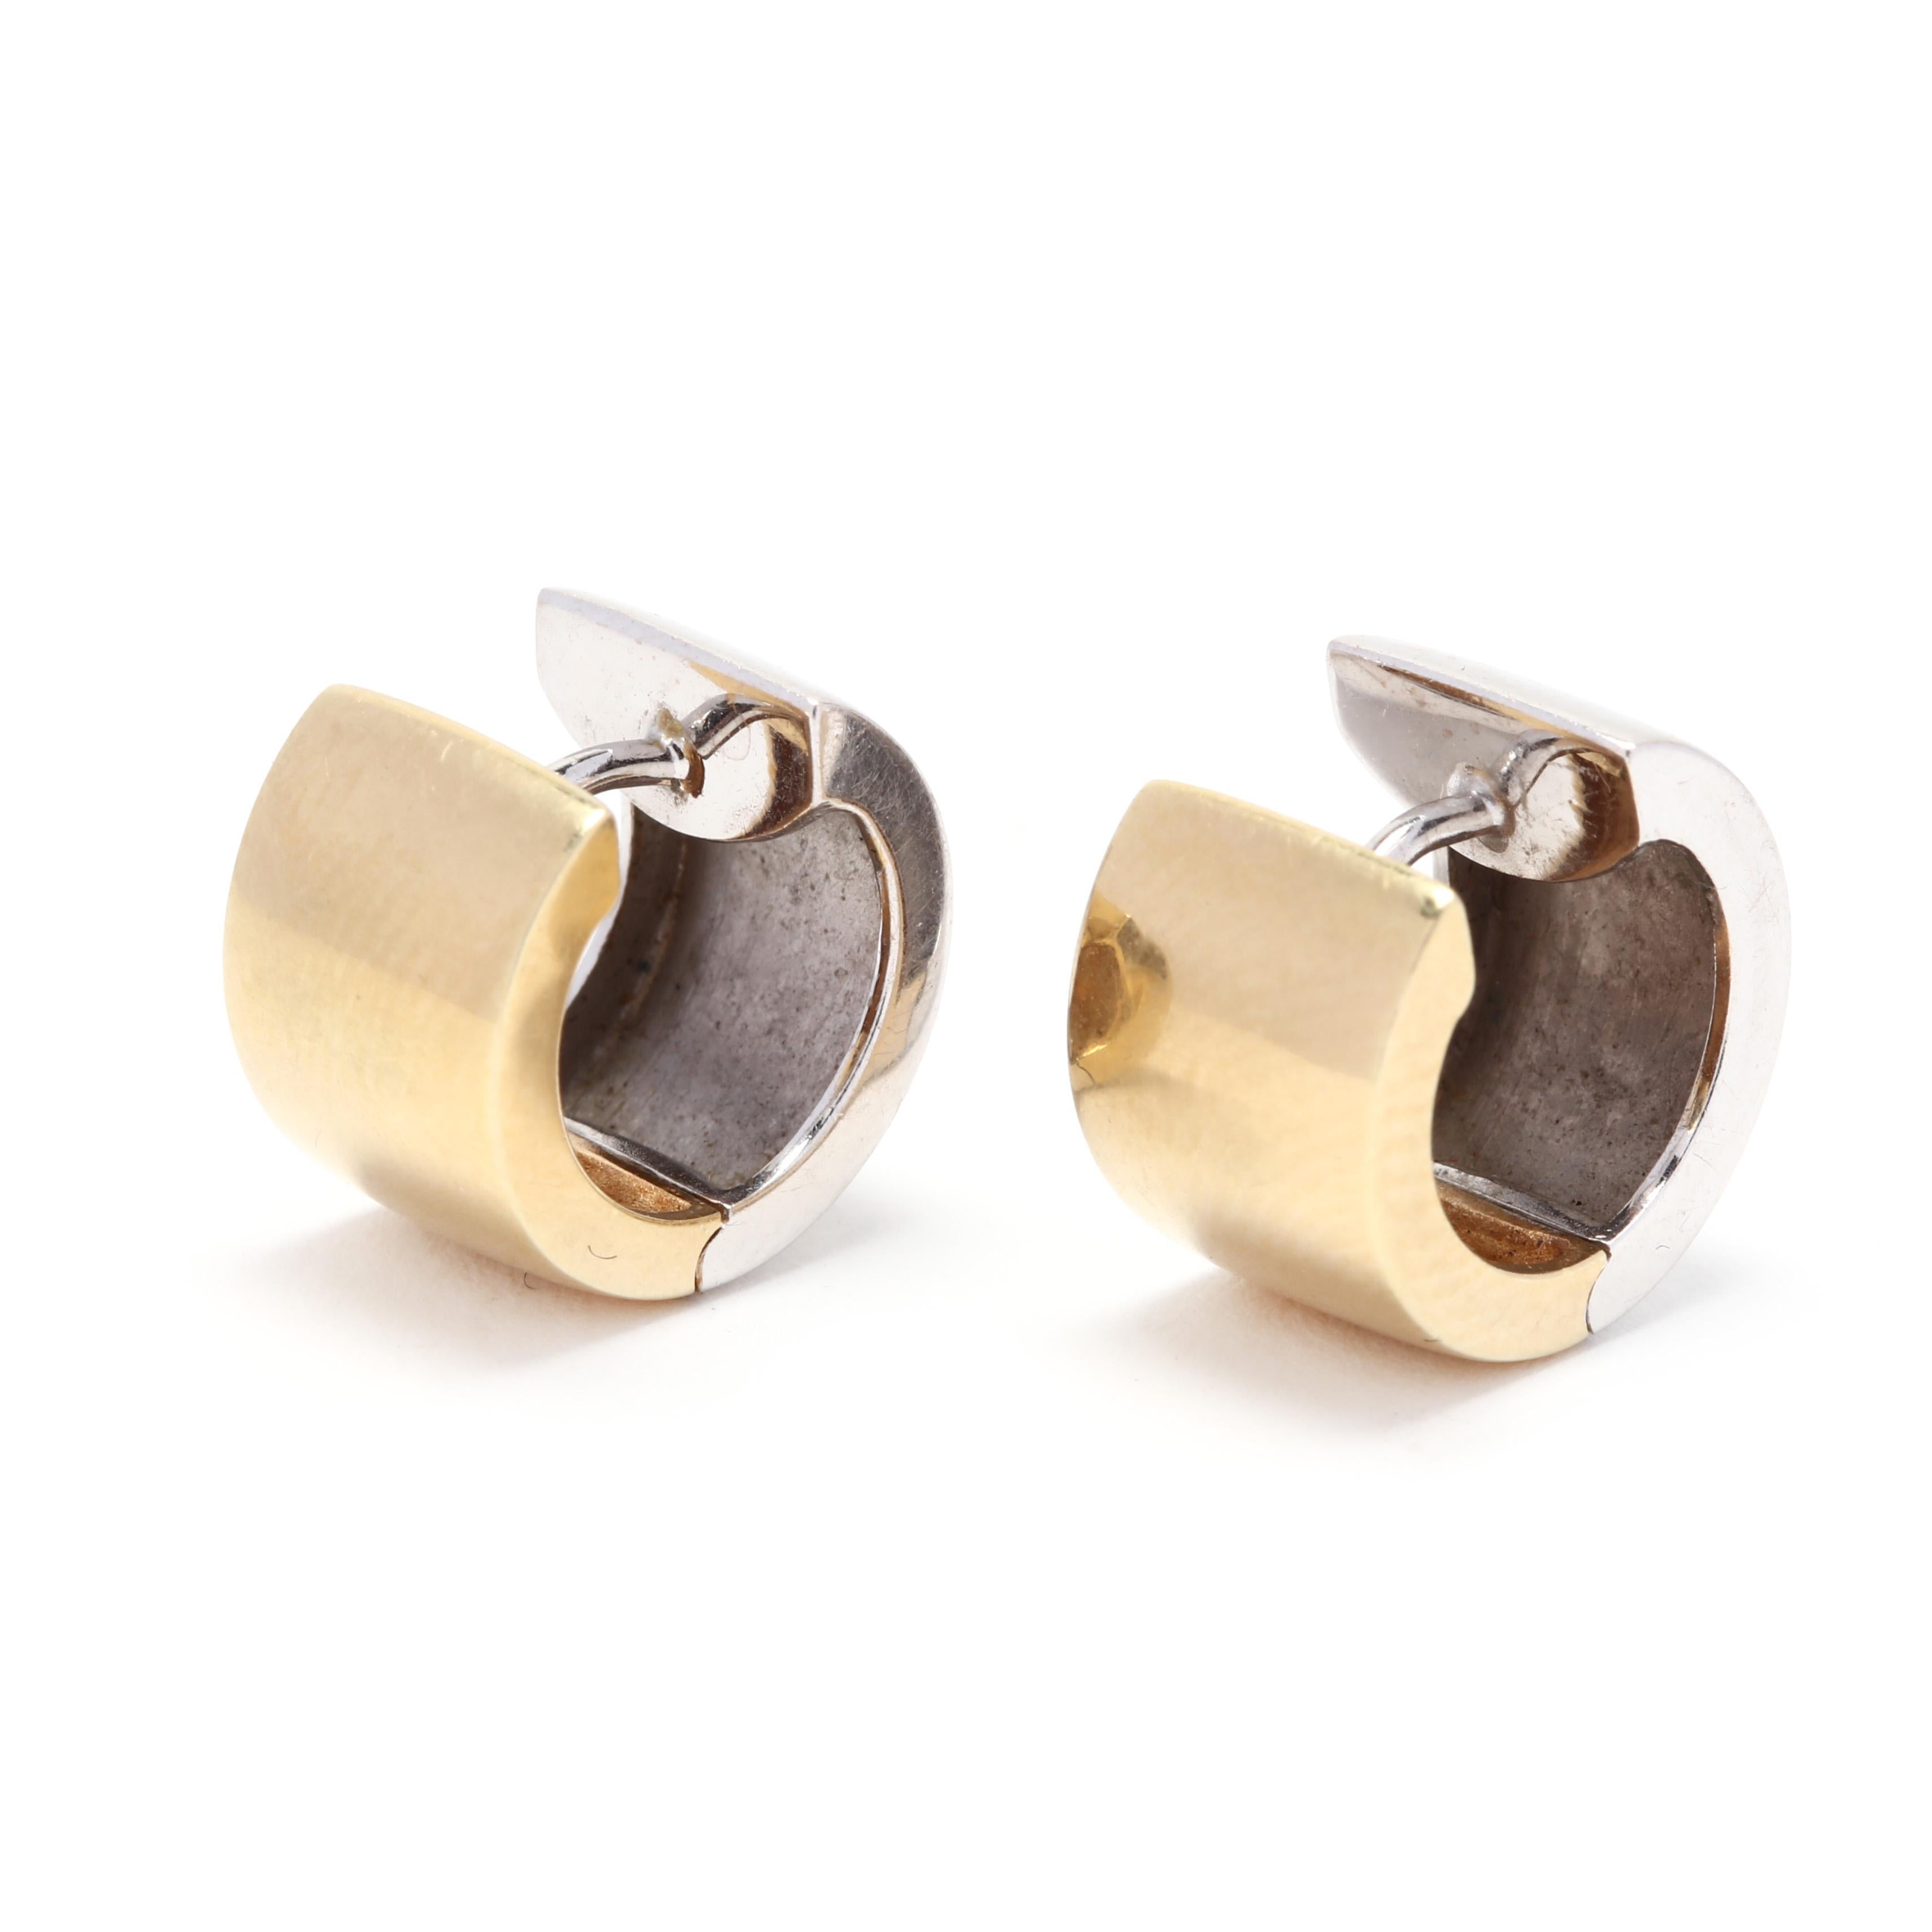 A pair of 14 karat yellow and white gold huggie hoop earrings. These earrings feature a flat wide, huggie hoop design with white gold on one side and yellow gold on the other. These earrings are about the size of a dime and can be worn to show